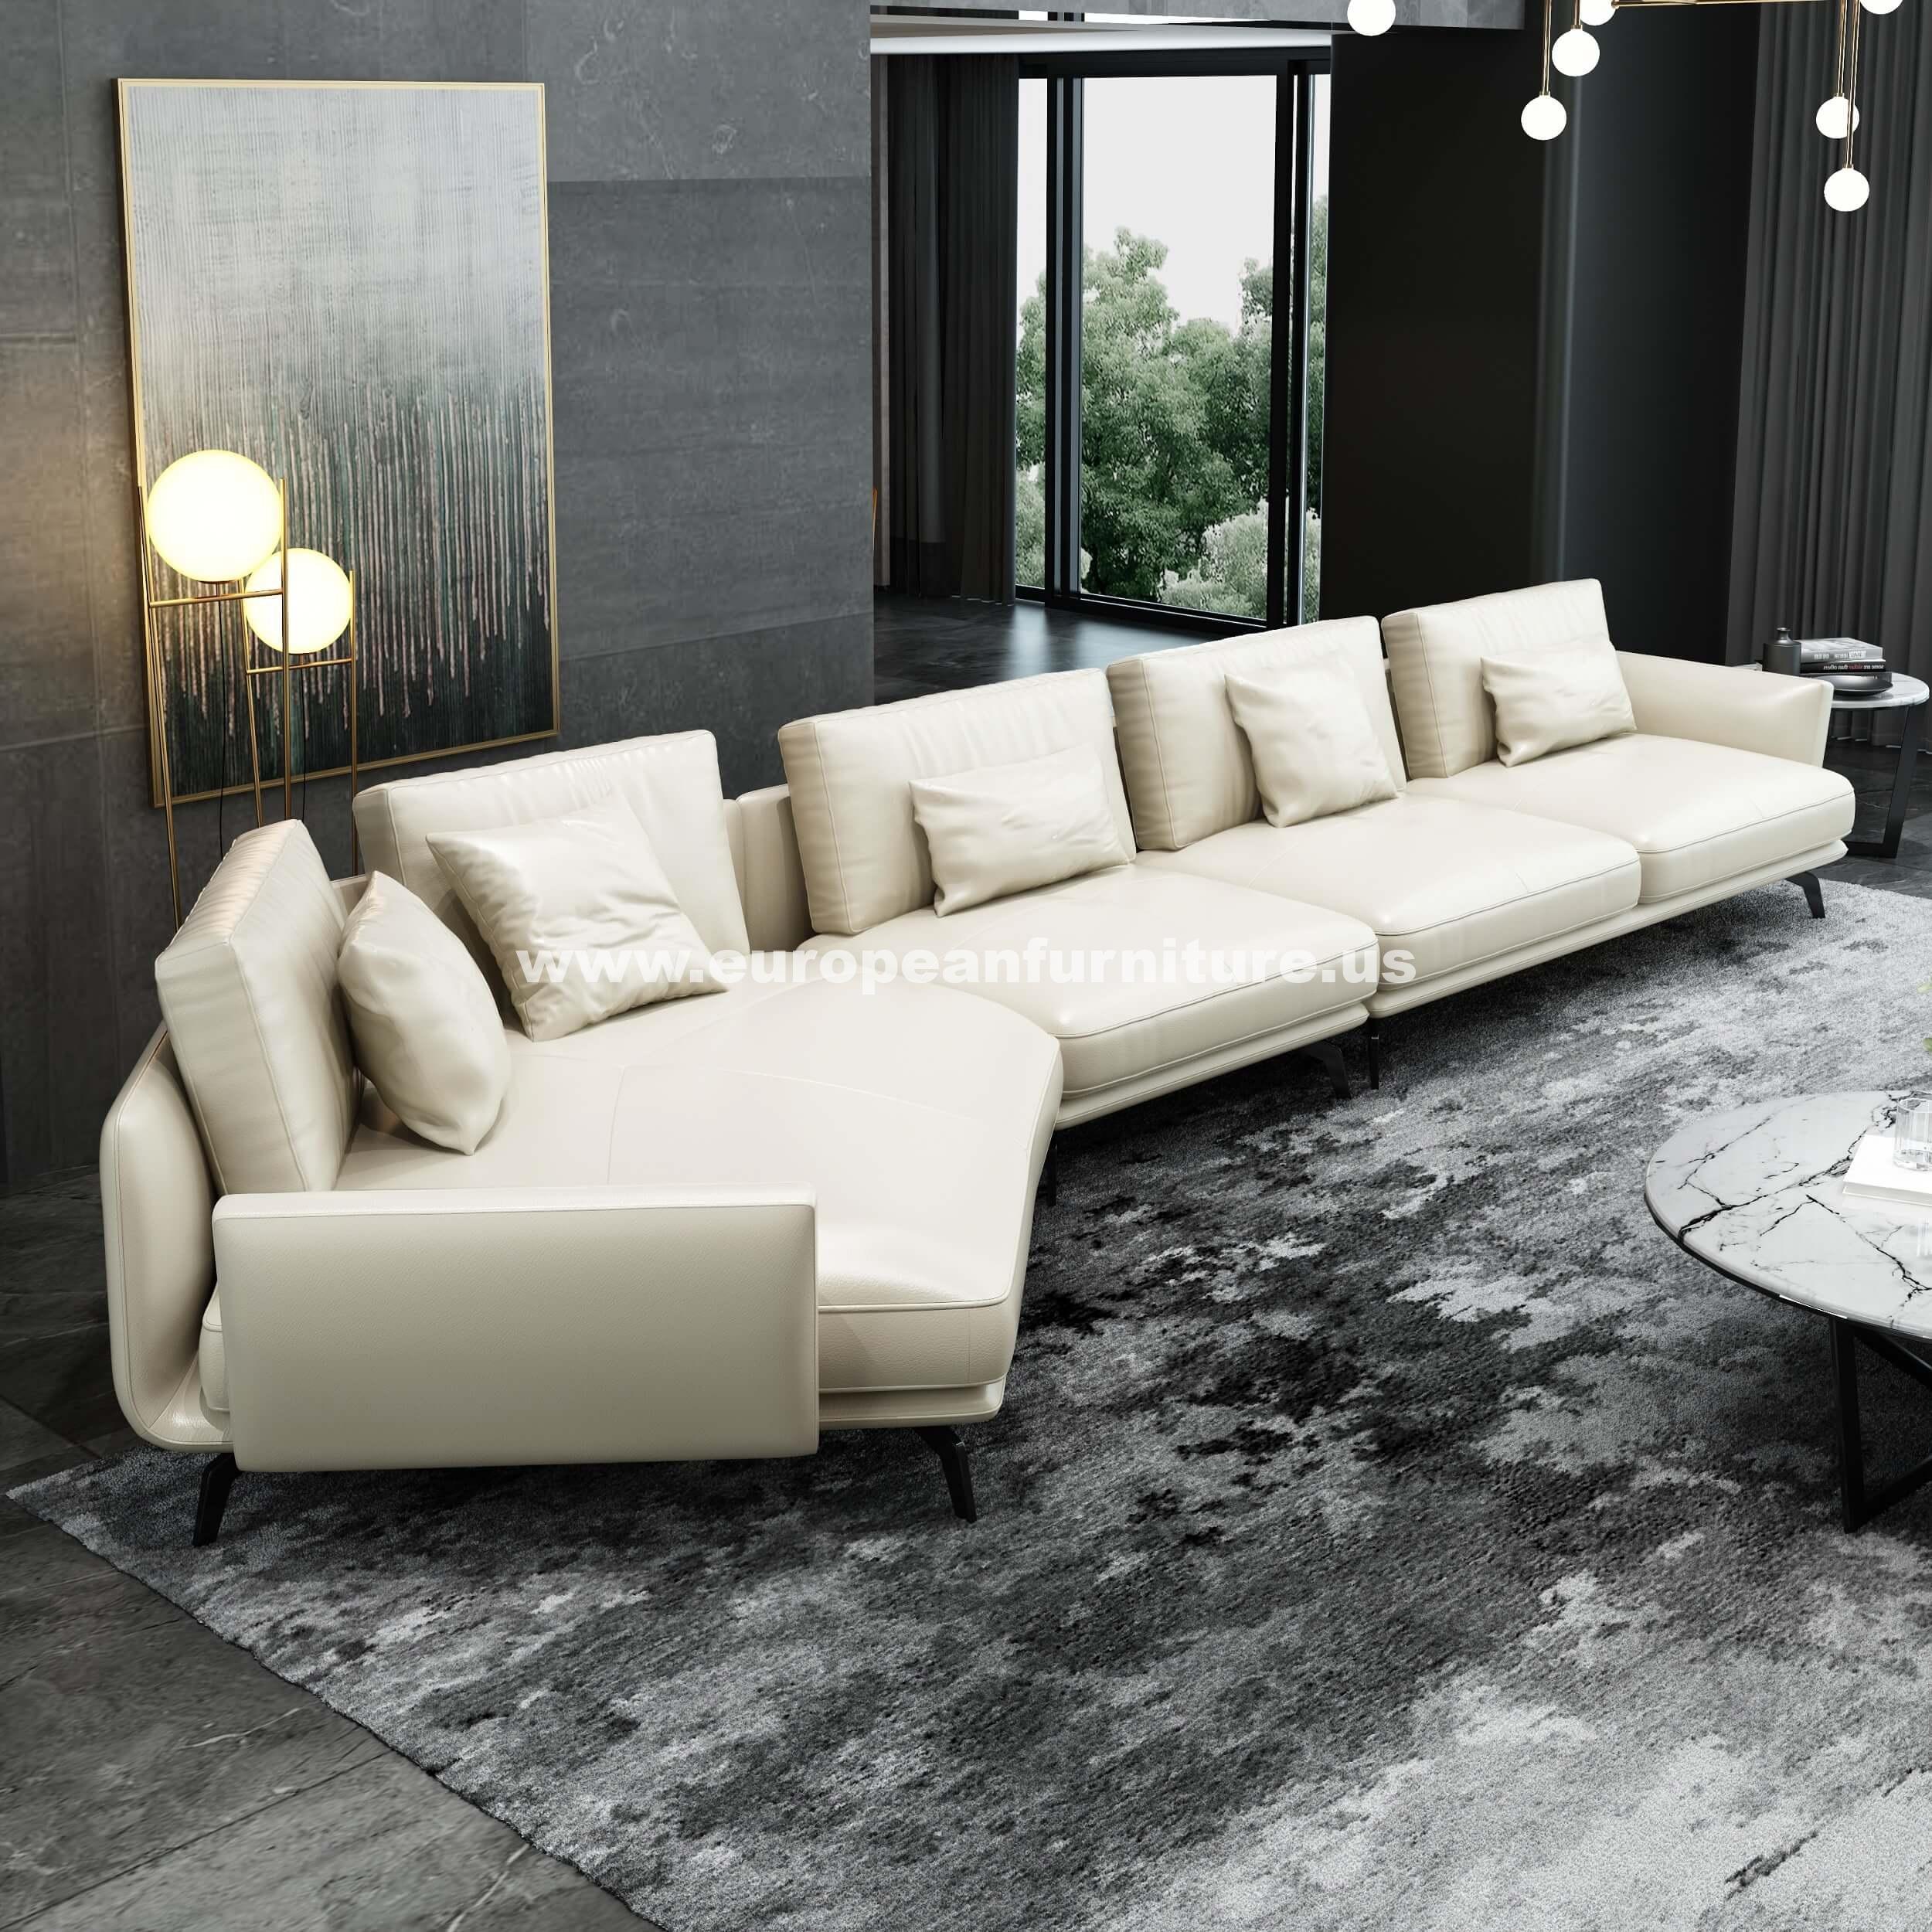 European Furniture - Galaxy Sectional Off White Italian Leather - EF-54436L-3LHC - New Star Living